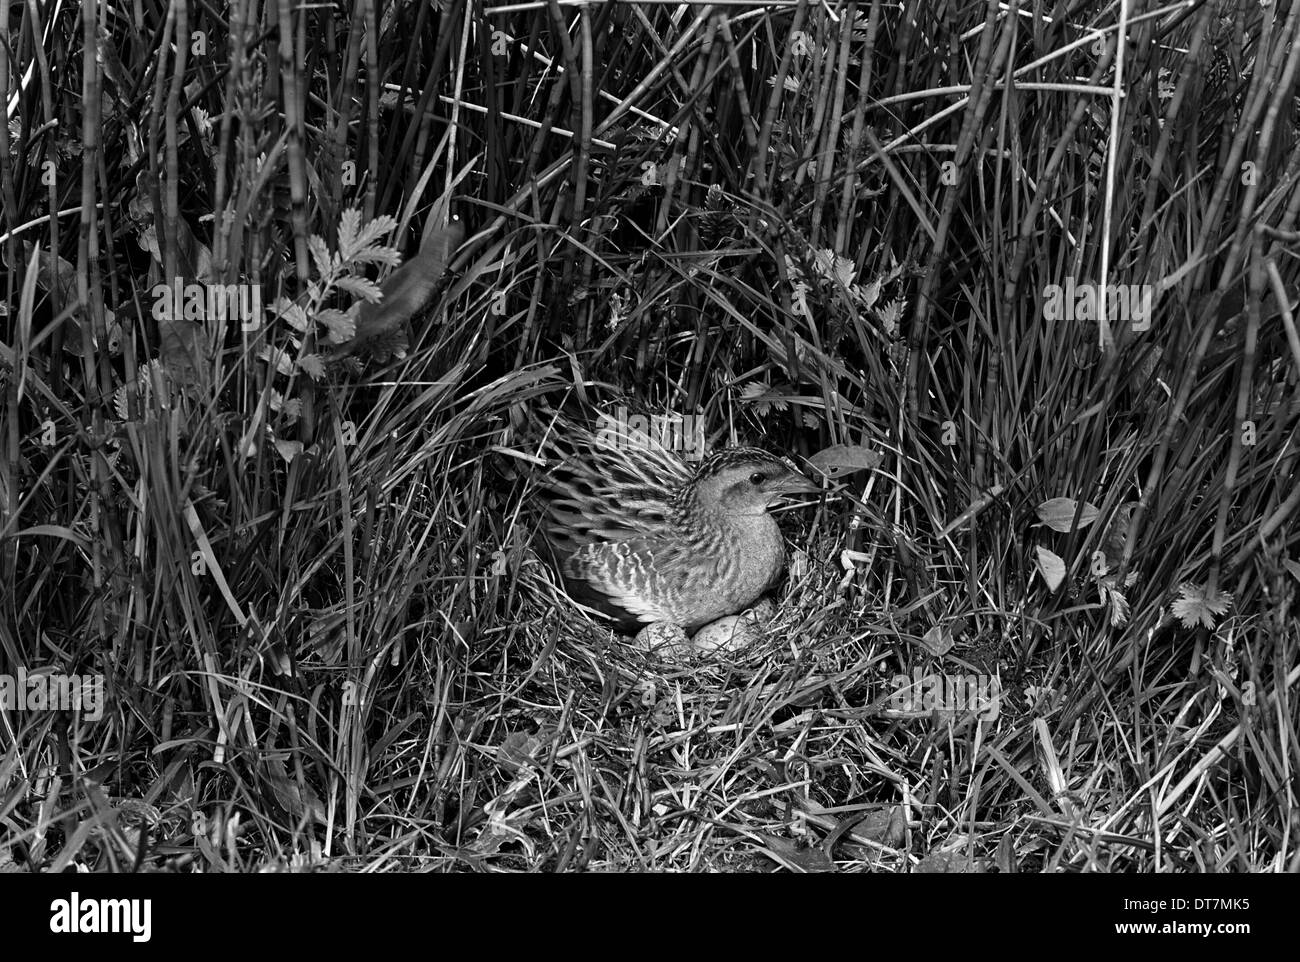 Corncrake at nest - Orkney. Taken in1946 by Eric Hosking. Stock Photo